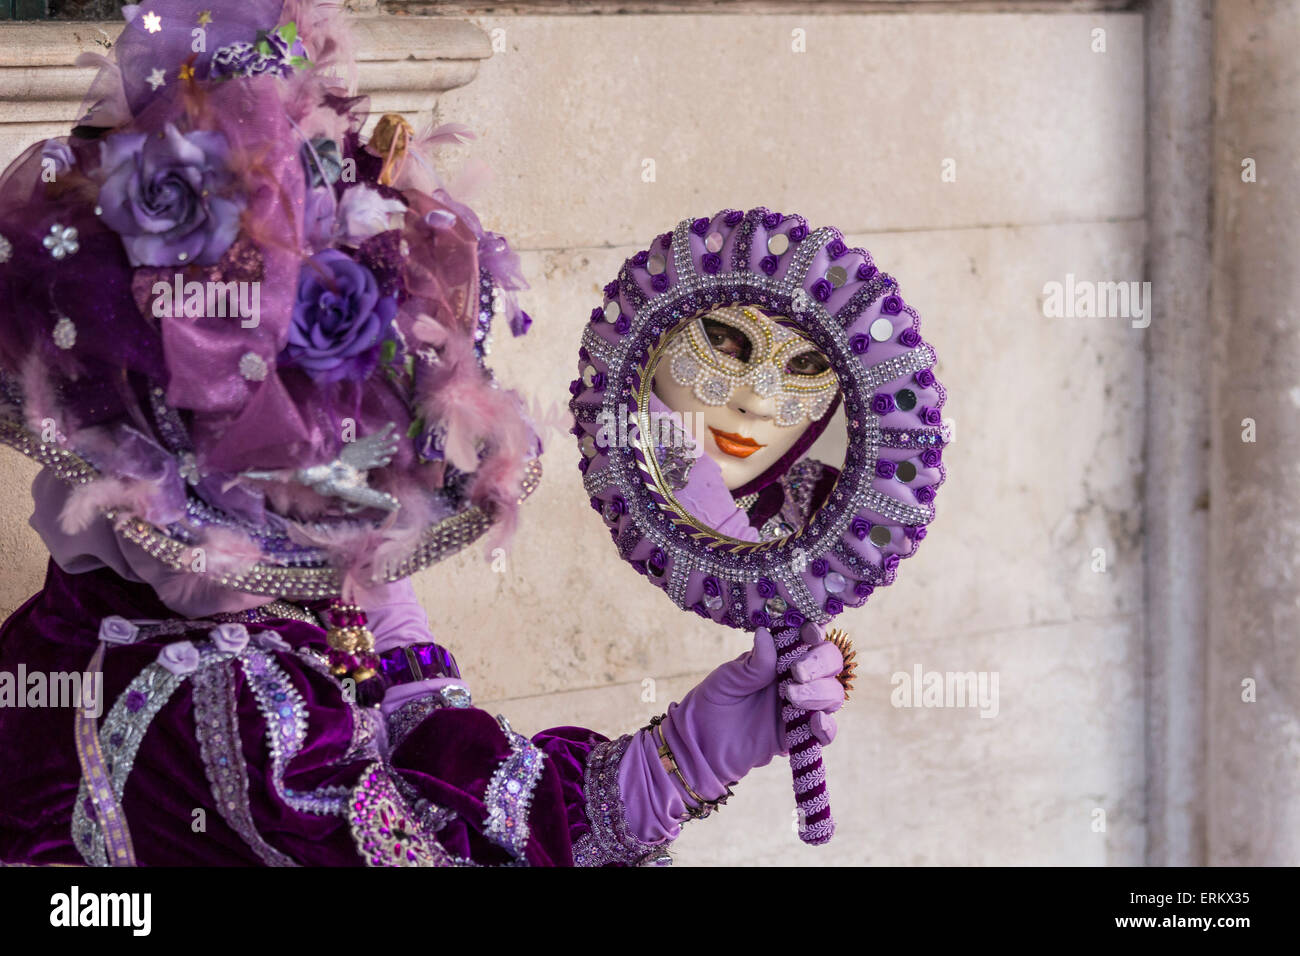 People in masks and costumes, Carnival, Venice, Veneto, Italy, Europe Stock Photo